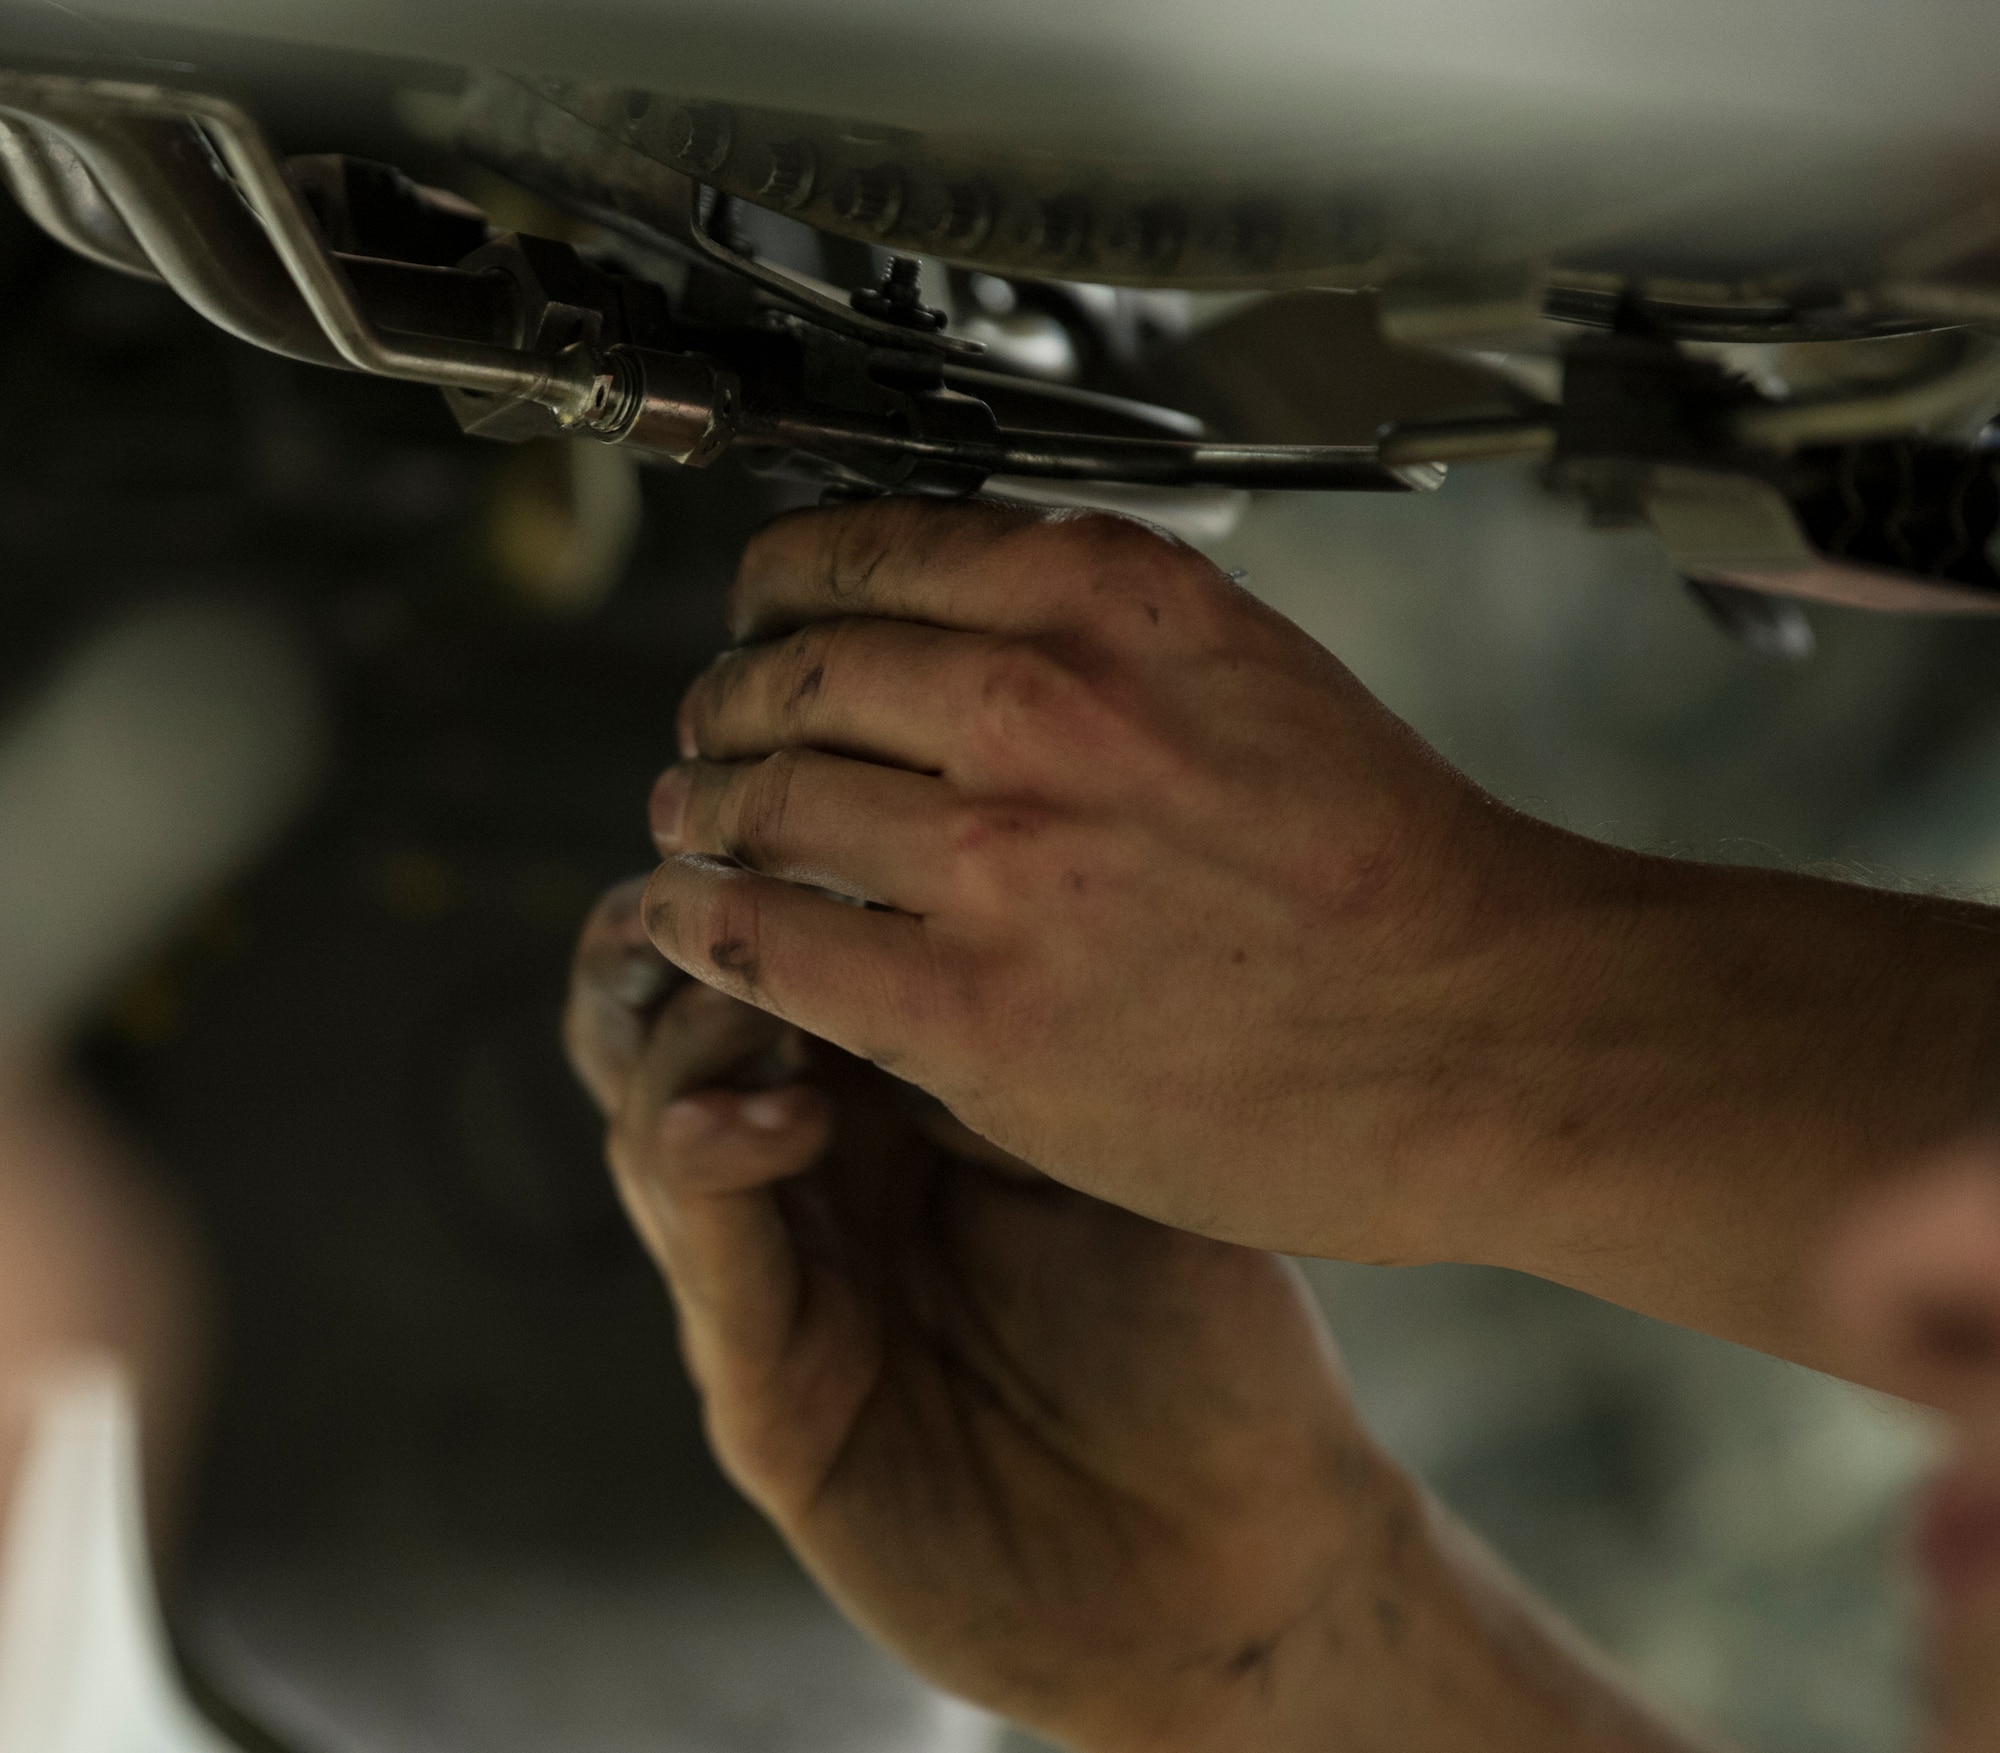 The 52nd MXS serves as the intermediate-level maintenance organization to provide safe and reliable maintenance to support the 52nd Fighter Wing and tenant units.